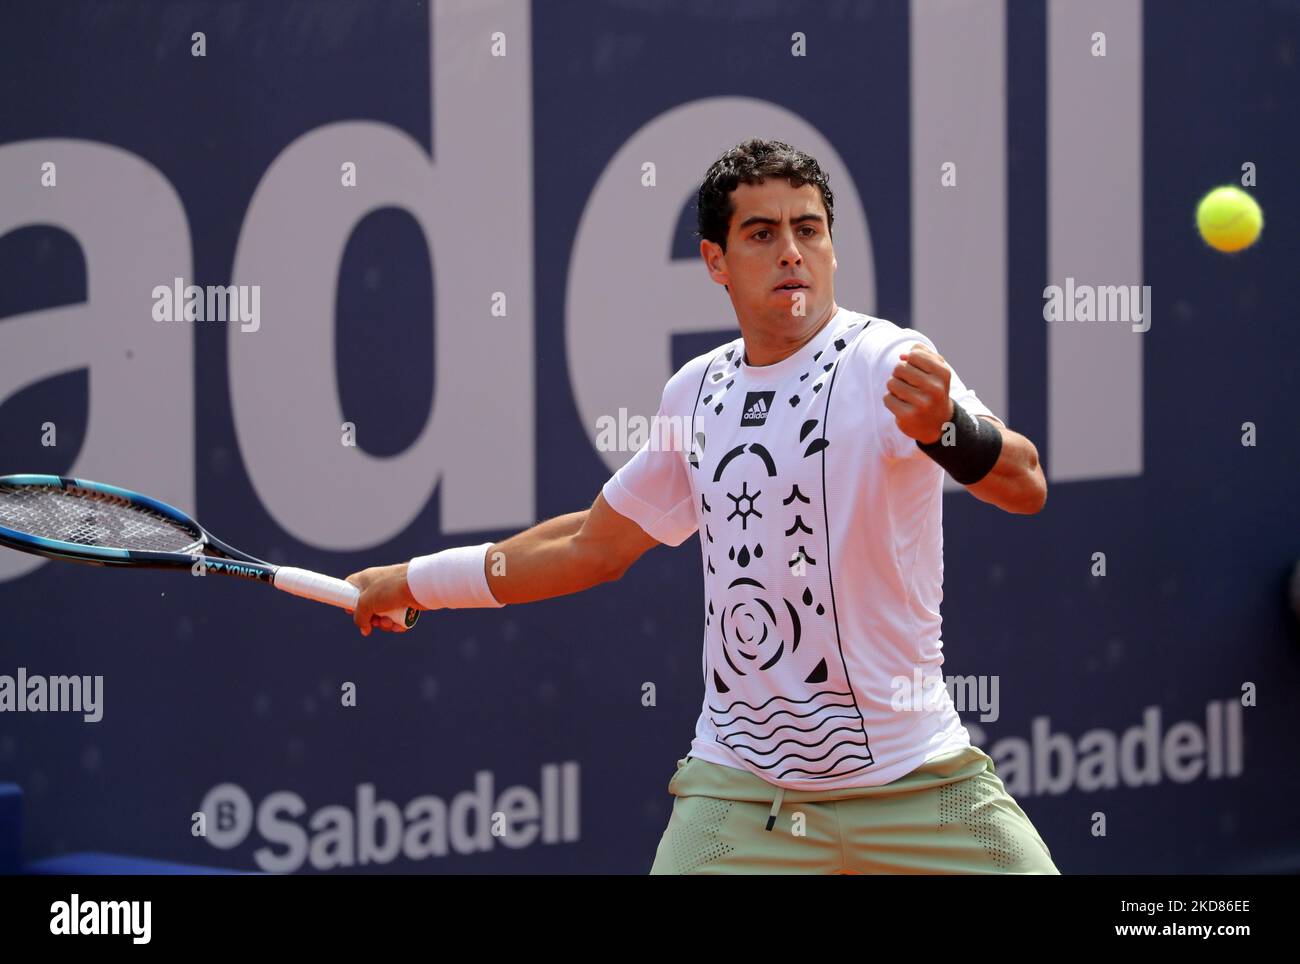 Jaume Munar during the match against Carlos Alcaraz, corresponding to the round of 16 of the Barcelona Open Banc Sabadell tennis tournament, 69th Conde de Godo Trophy, in Barcelona, on 22th April 2022. (Photo by Joan Valls/Urbanandsport /NurPhoto) Stock Photo